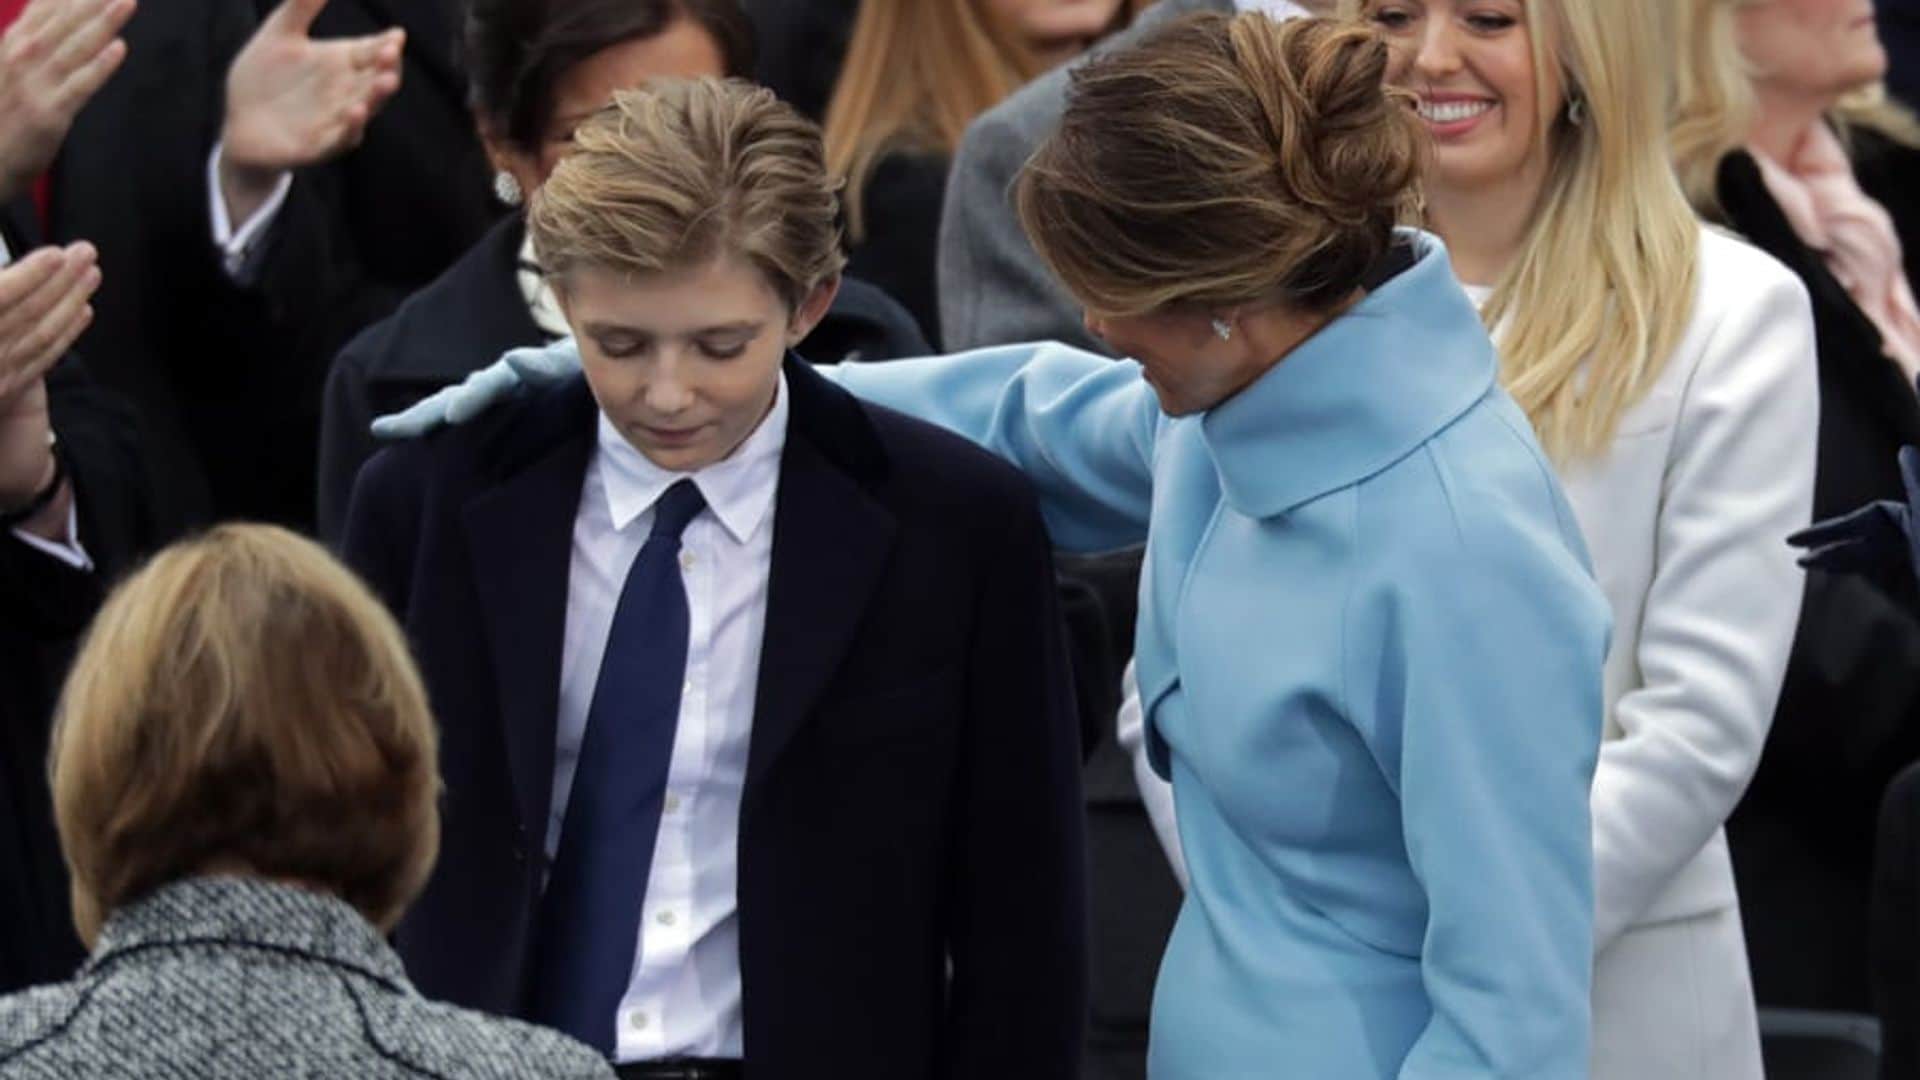 Barron Trump and other young family member step into spotlight at inauguration